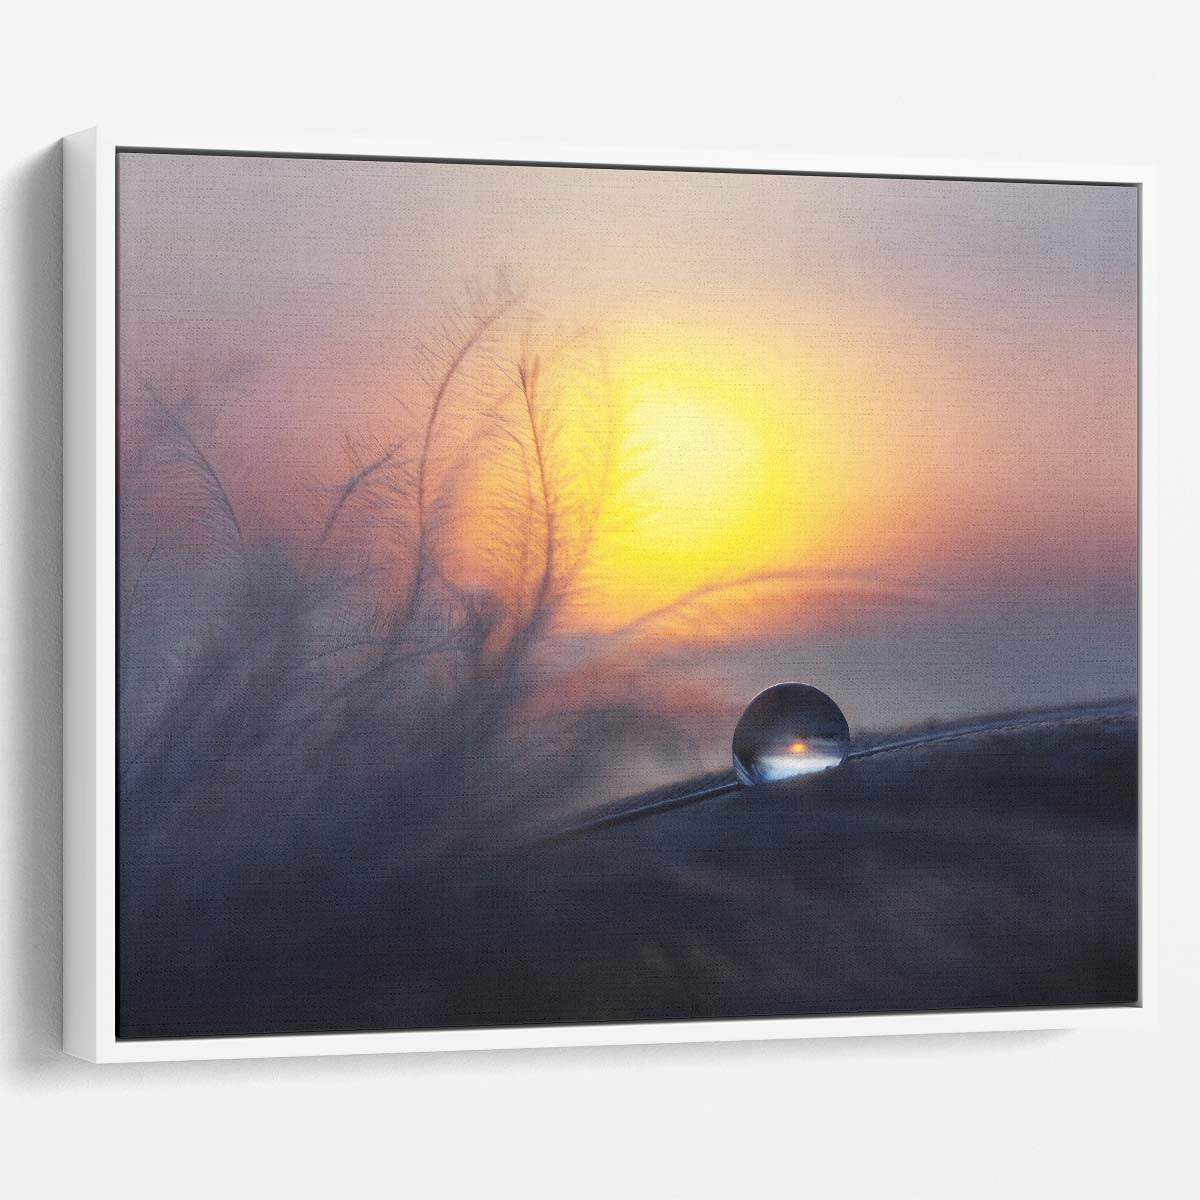 Delicate Dawn Feather & Dewdrop Sunrise Wall Art by Luxuriance Designs. Made in USA.